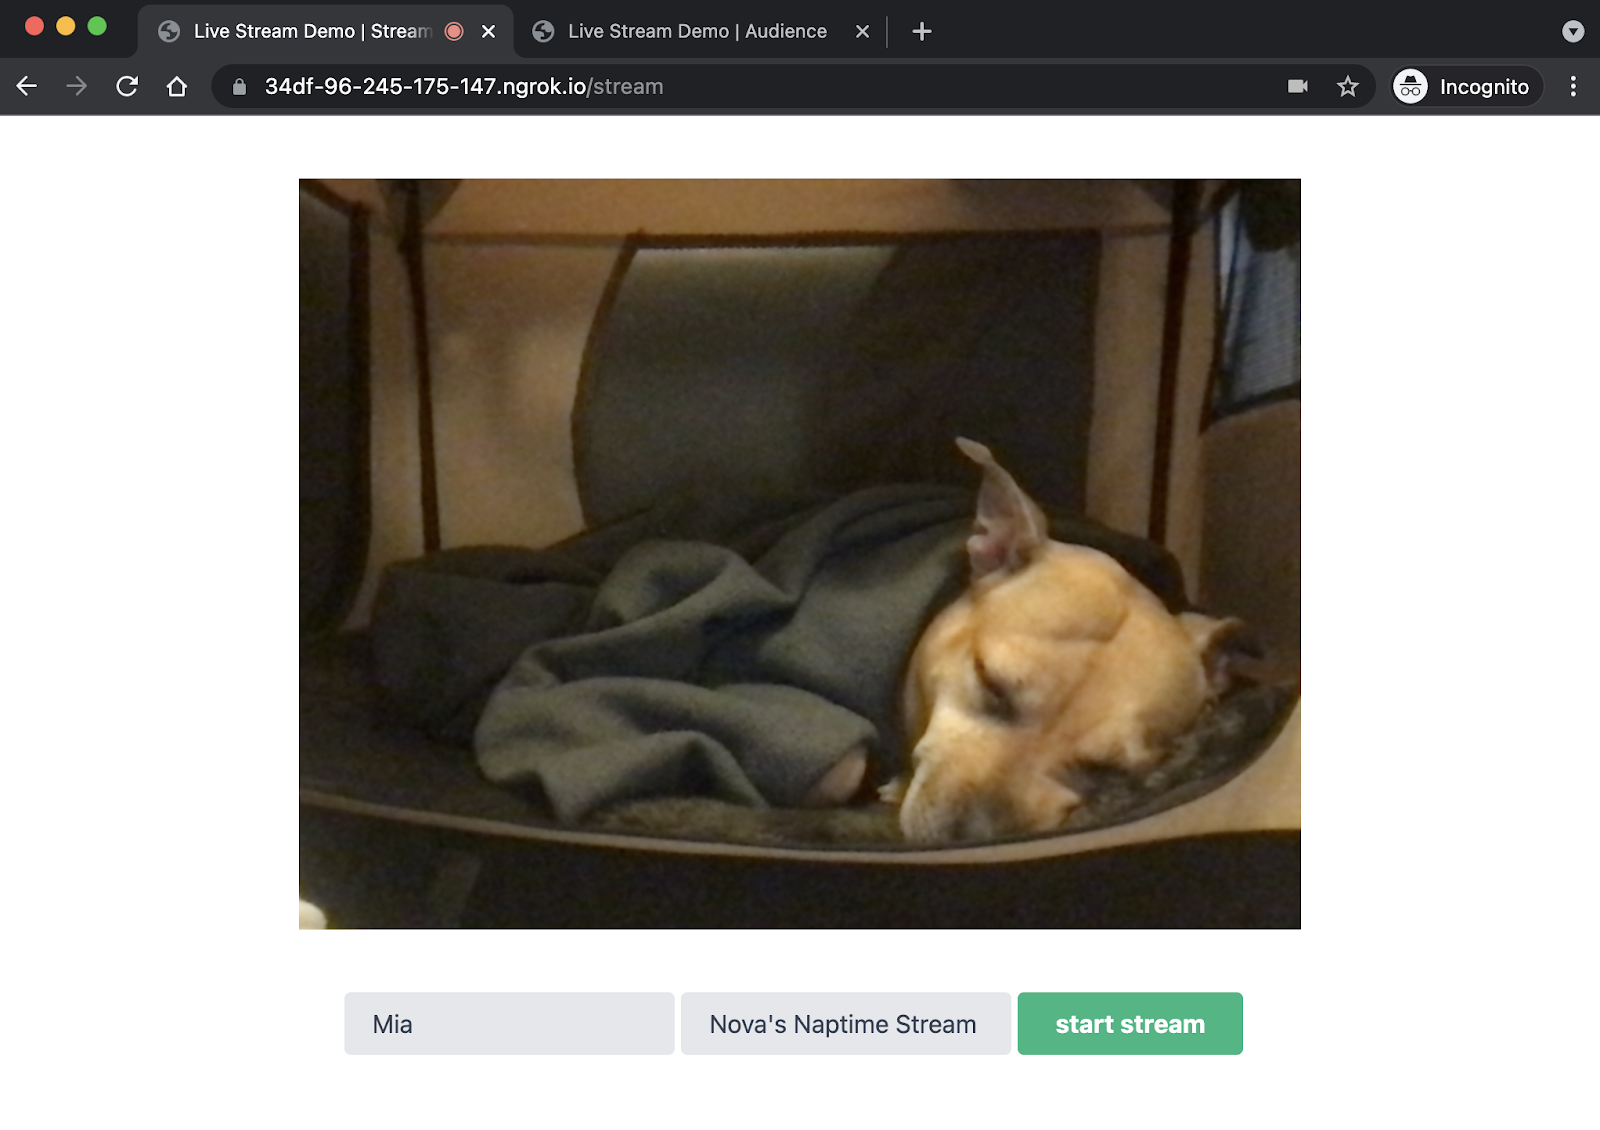 Streamer view, with a sleeping dog in the video feed